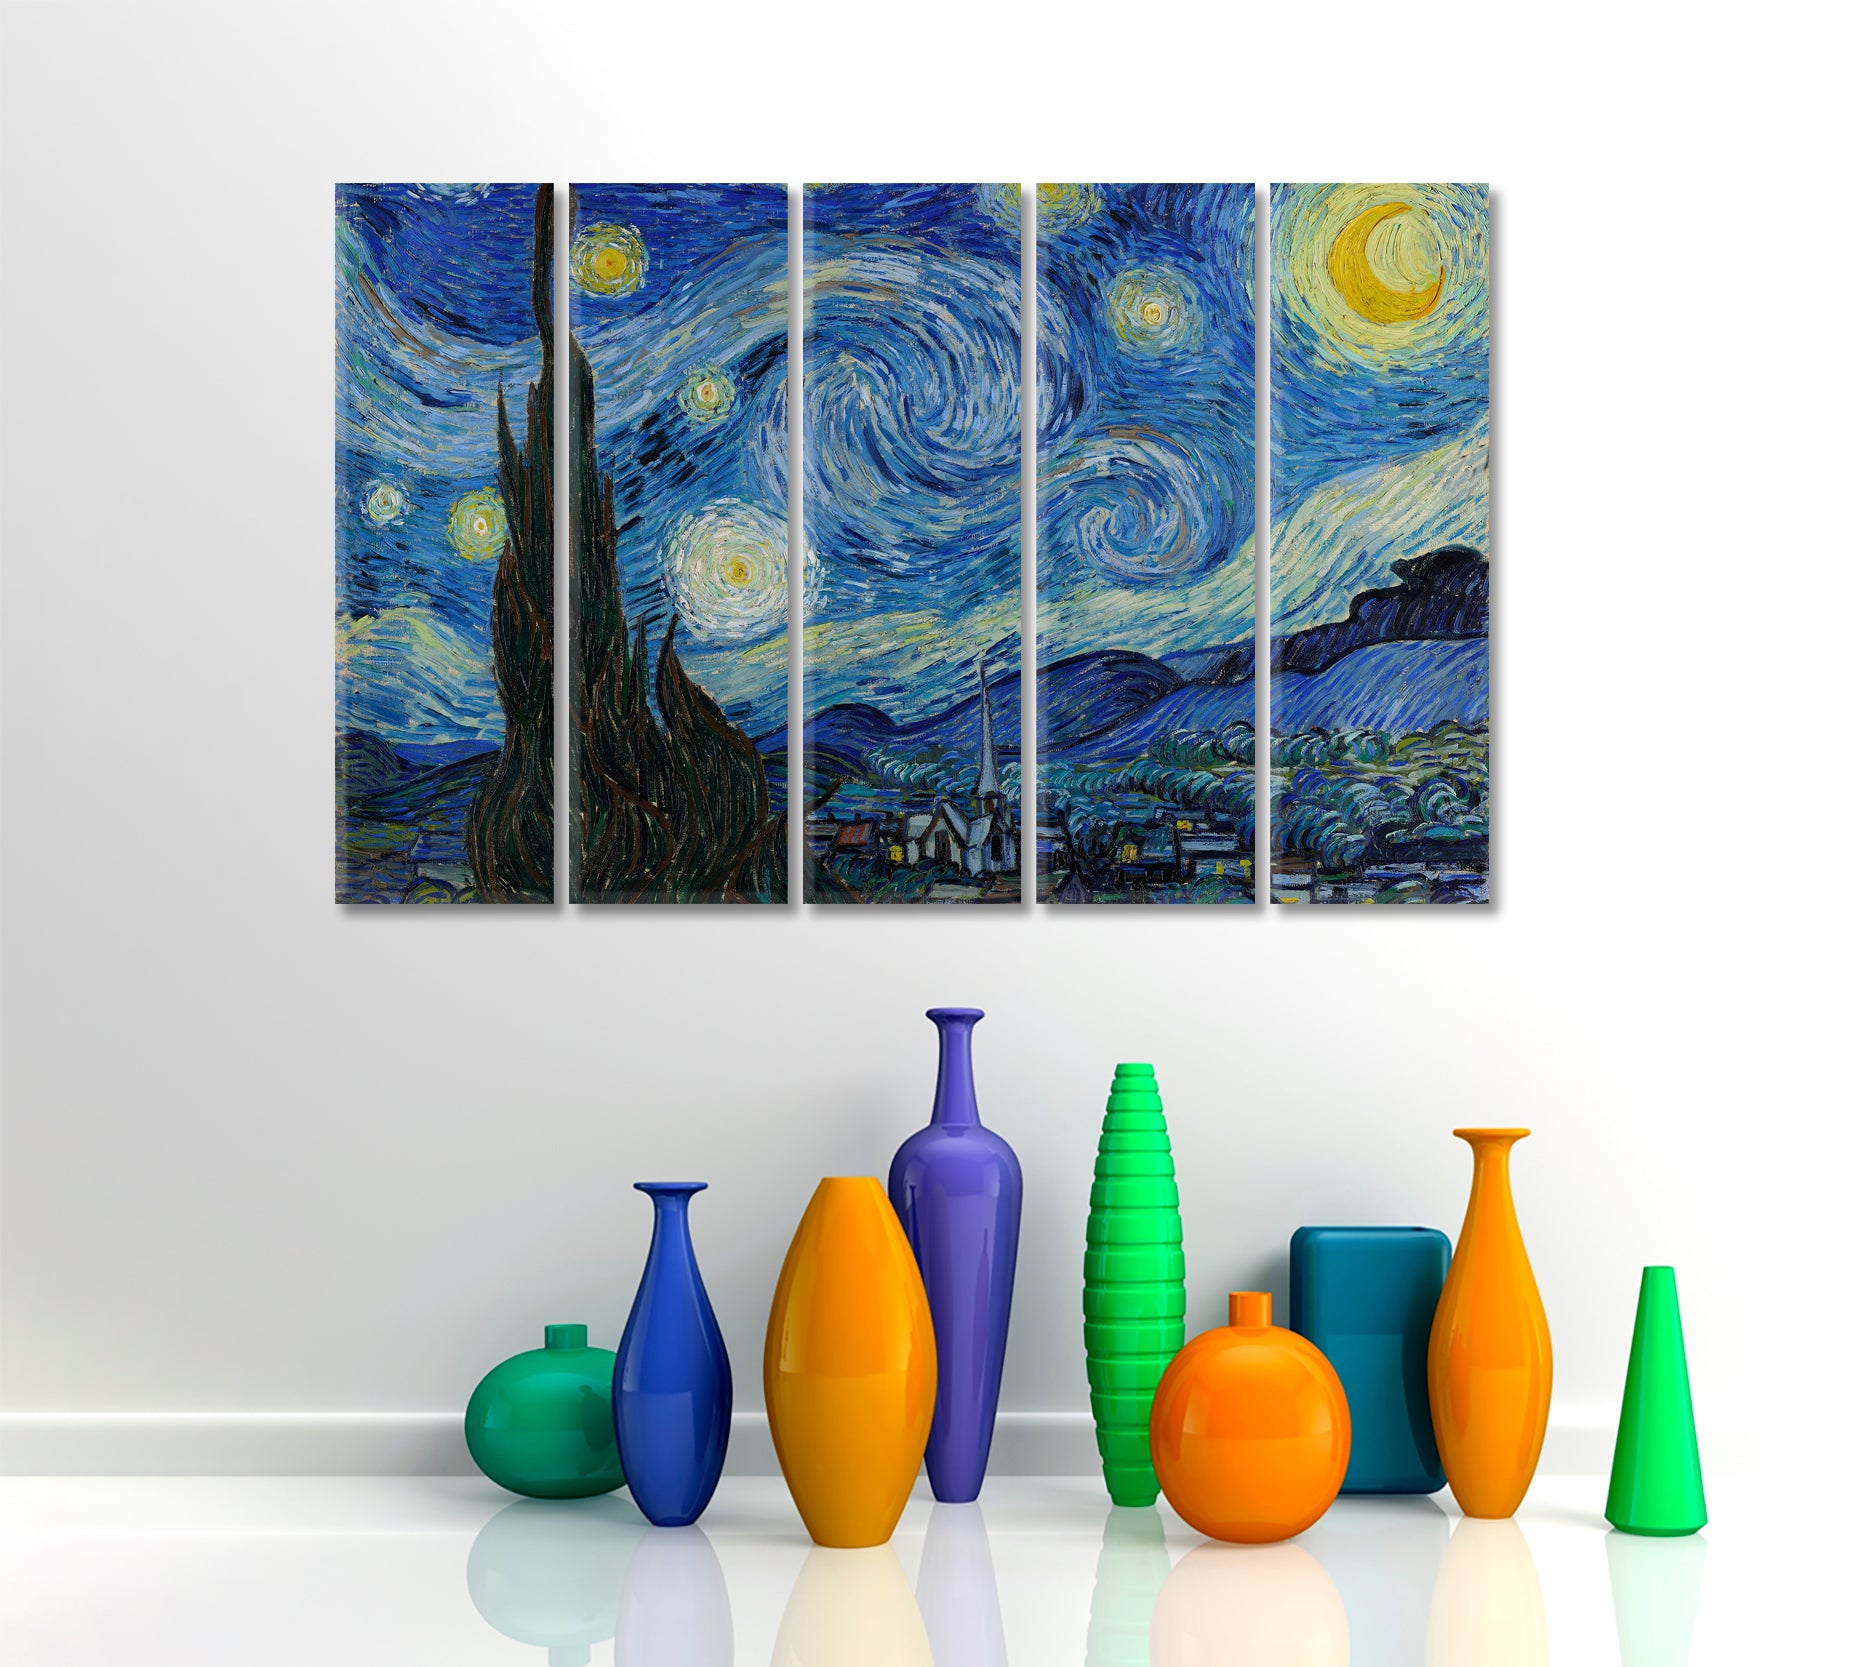 The Starry Night Vincent van Gogh Masterpieces Reproduction Contemporary Art Artesty 5 panels 36" x 24" 